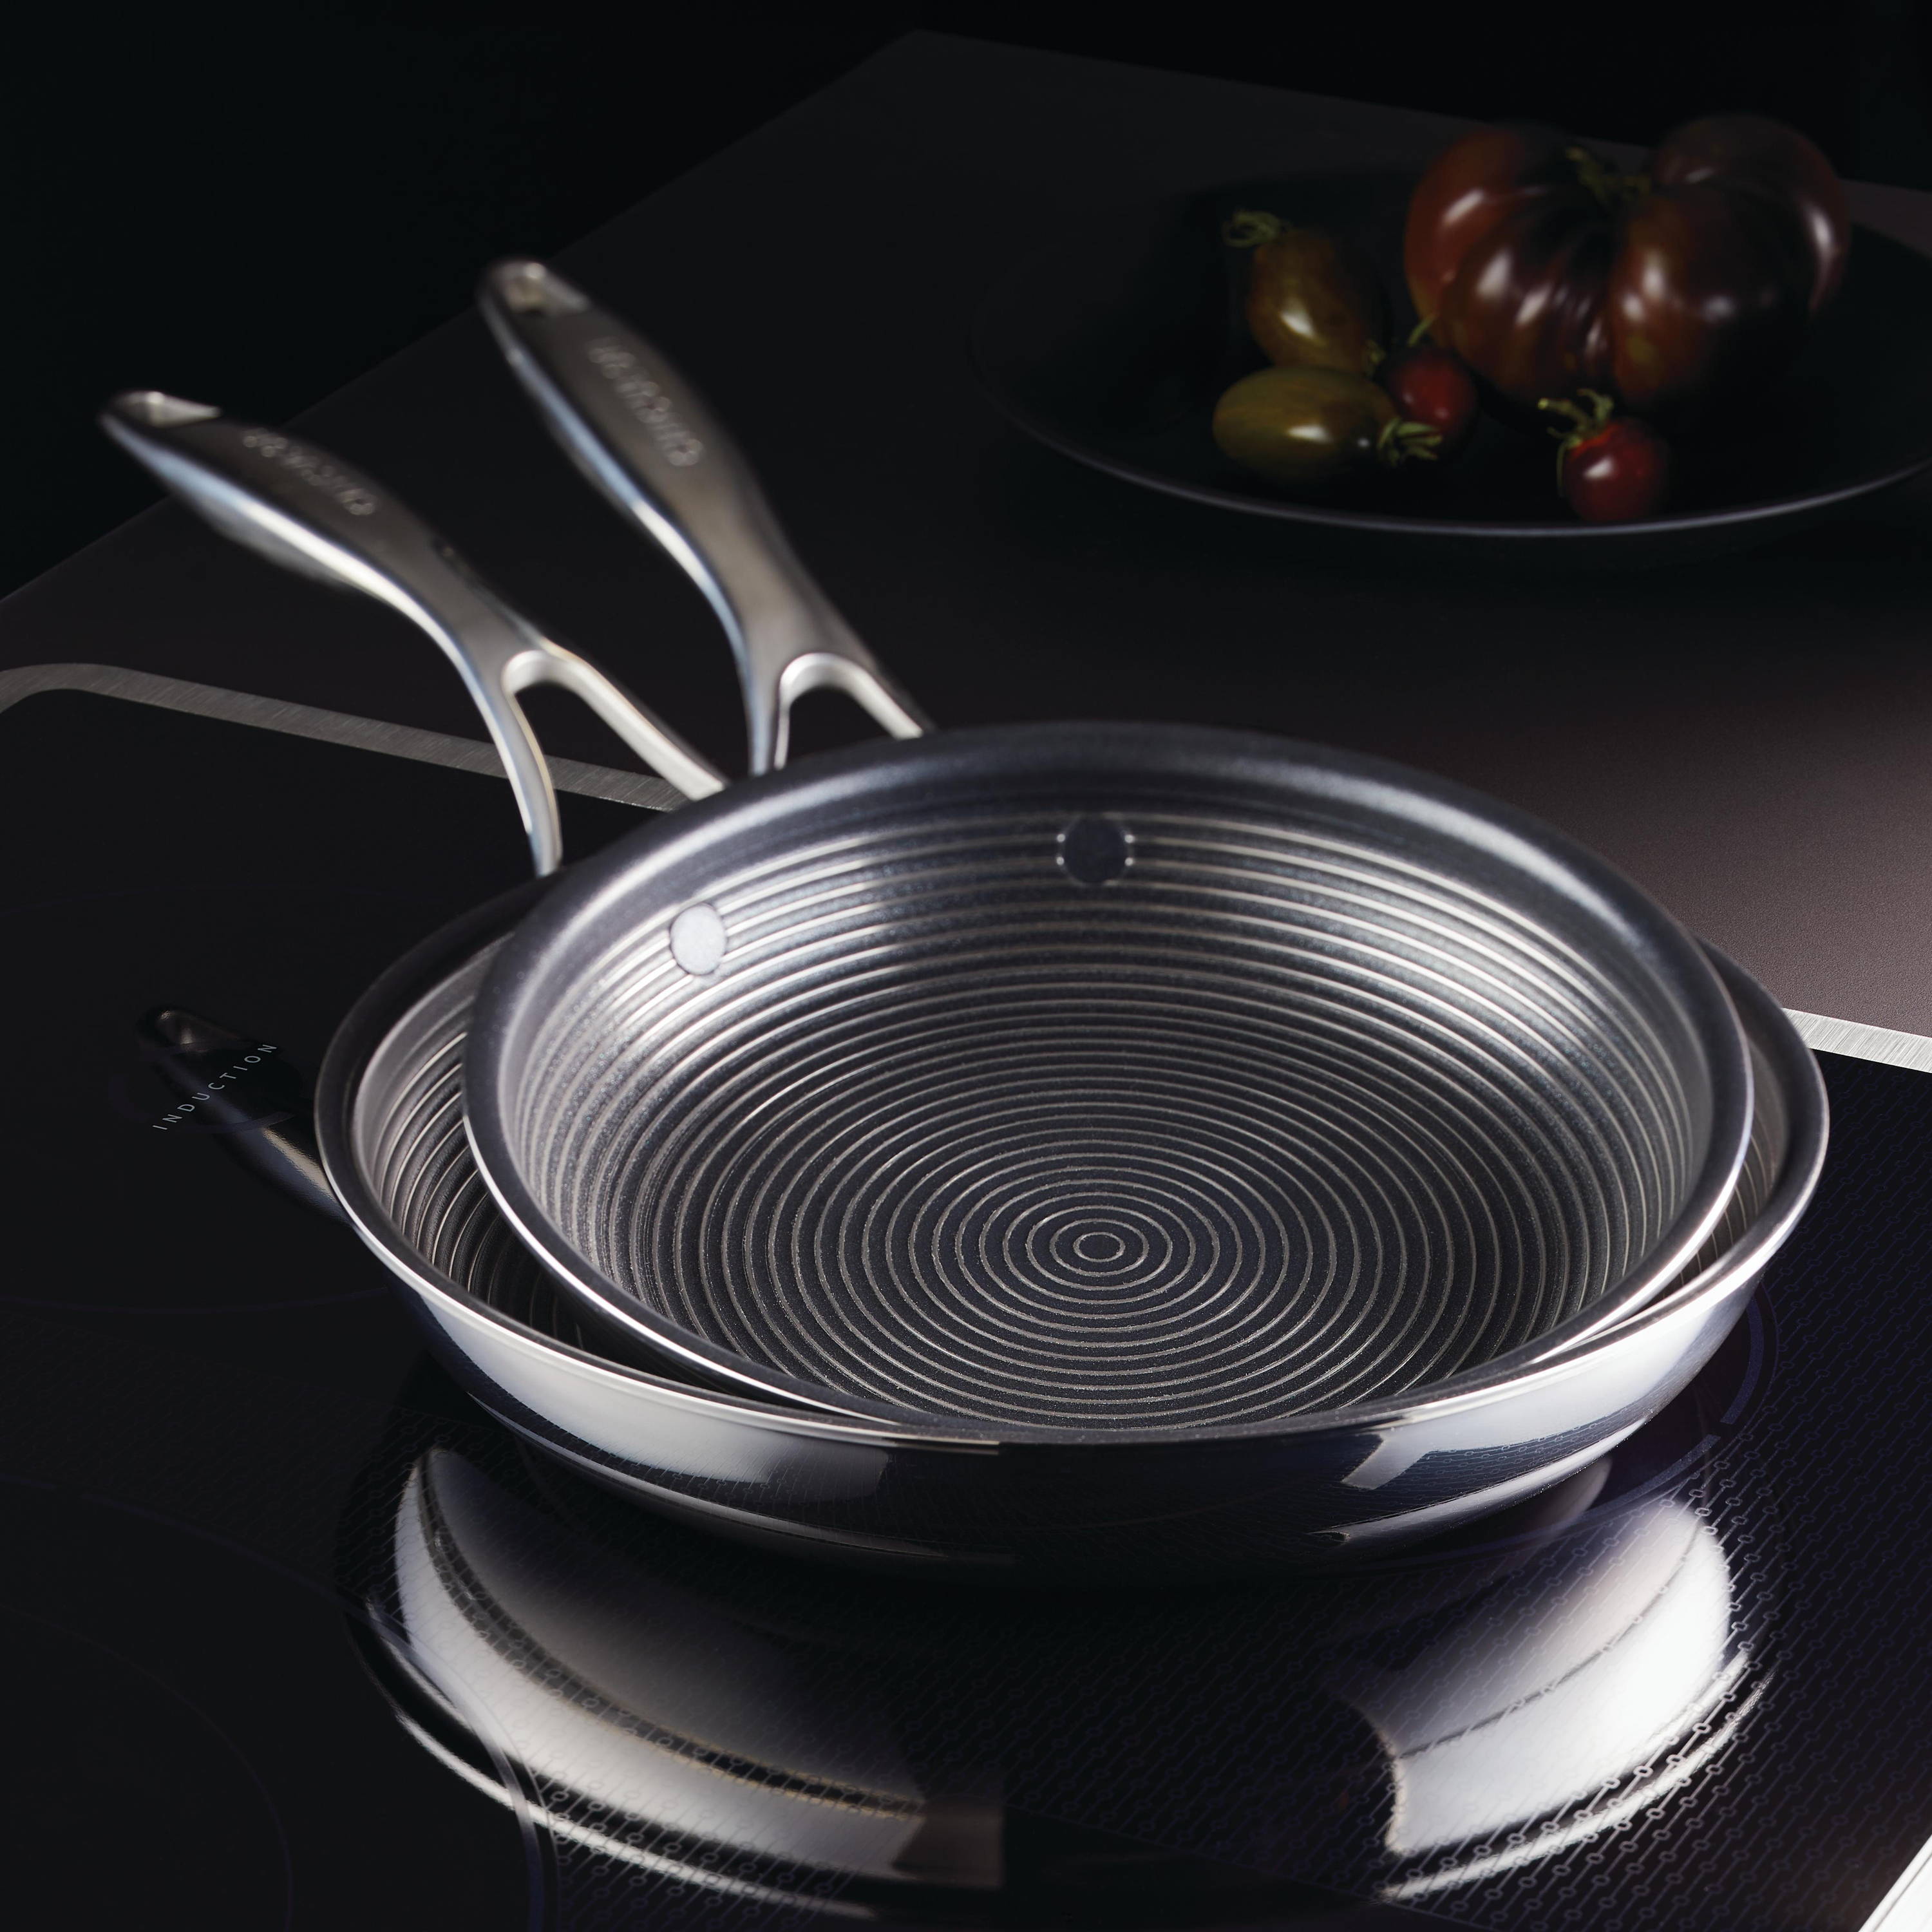 Circulon SteelShield Clad Stainless Steel 14 inch Wok Review and Giveaway •  Steamy Kitchen Recipes Giveaways